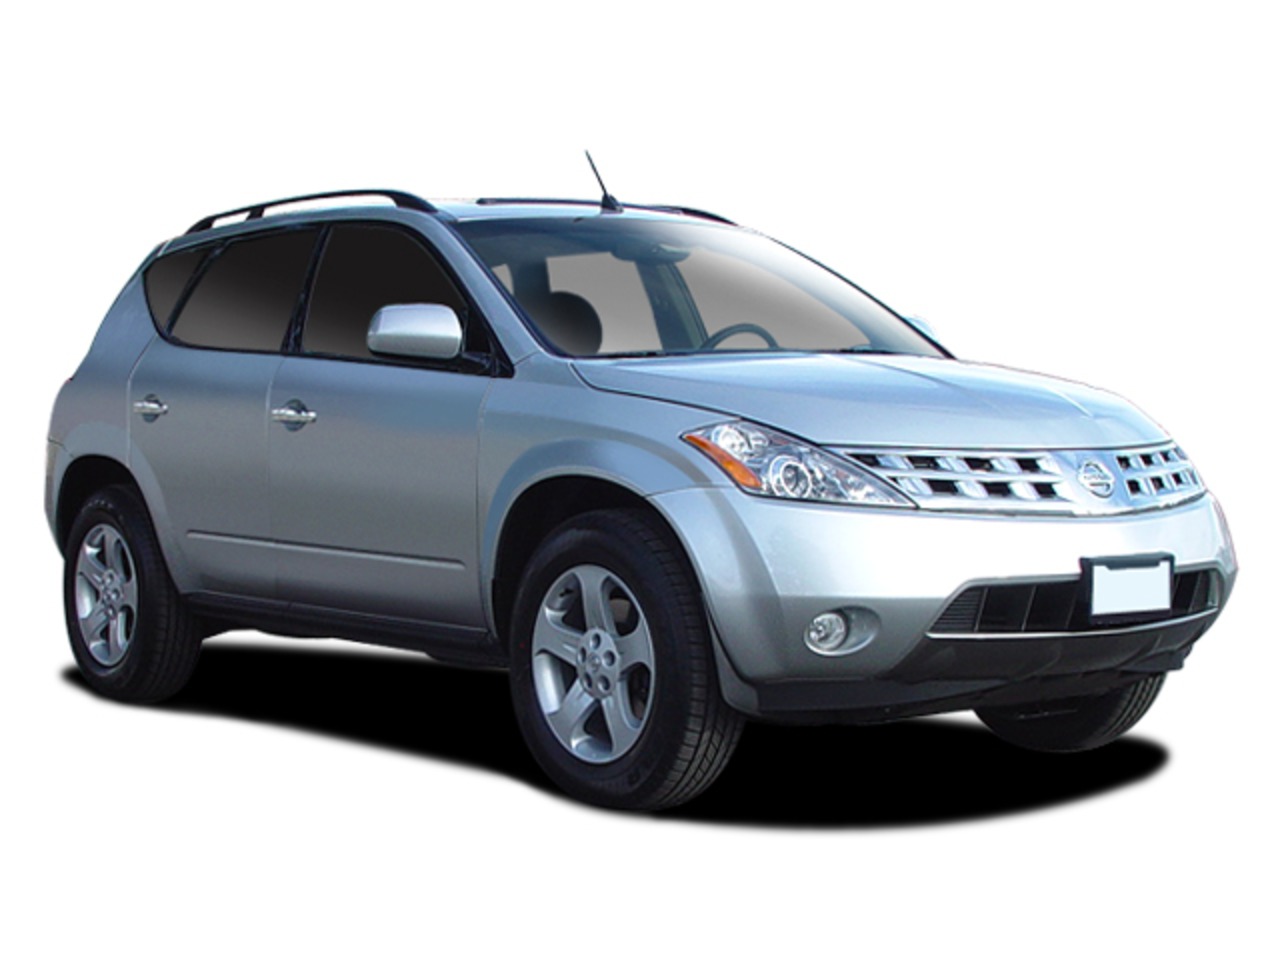 used 2005 Nissan Murano Fuel: 18 mpg city / 23 mpg hwy. MSRP: $30,250